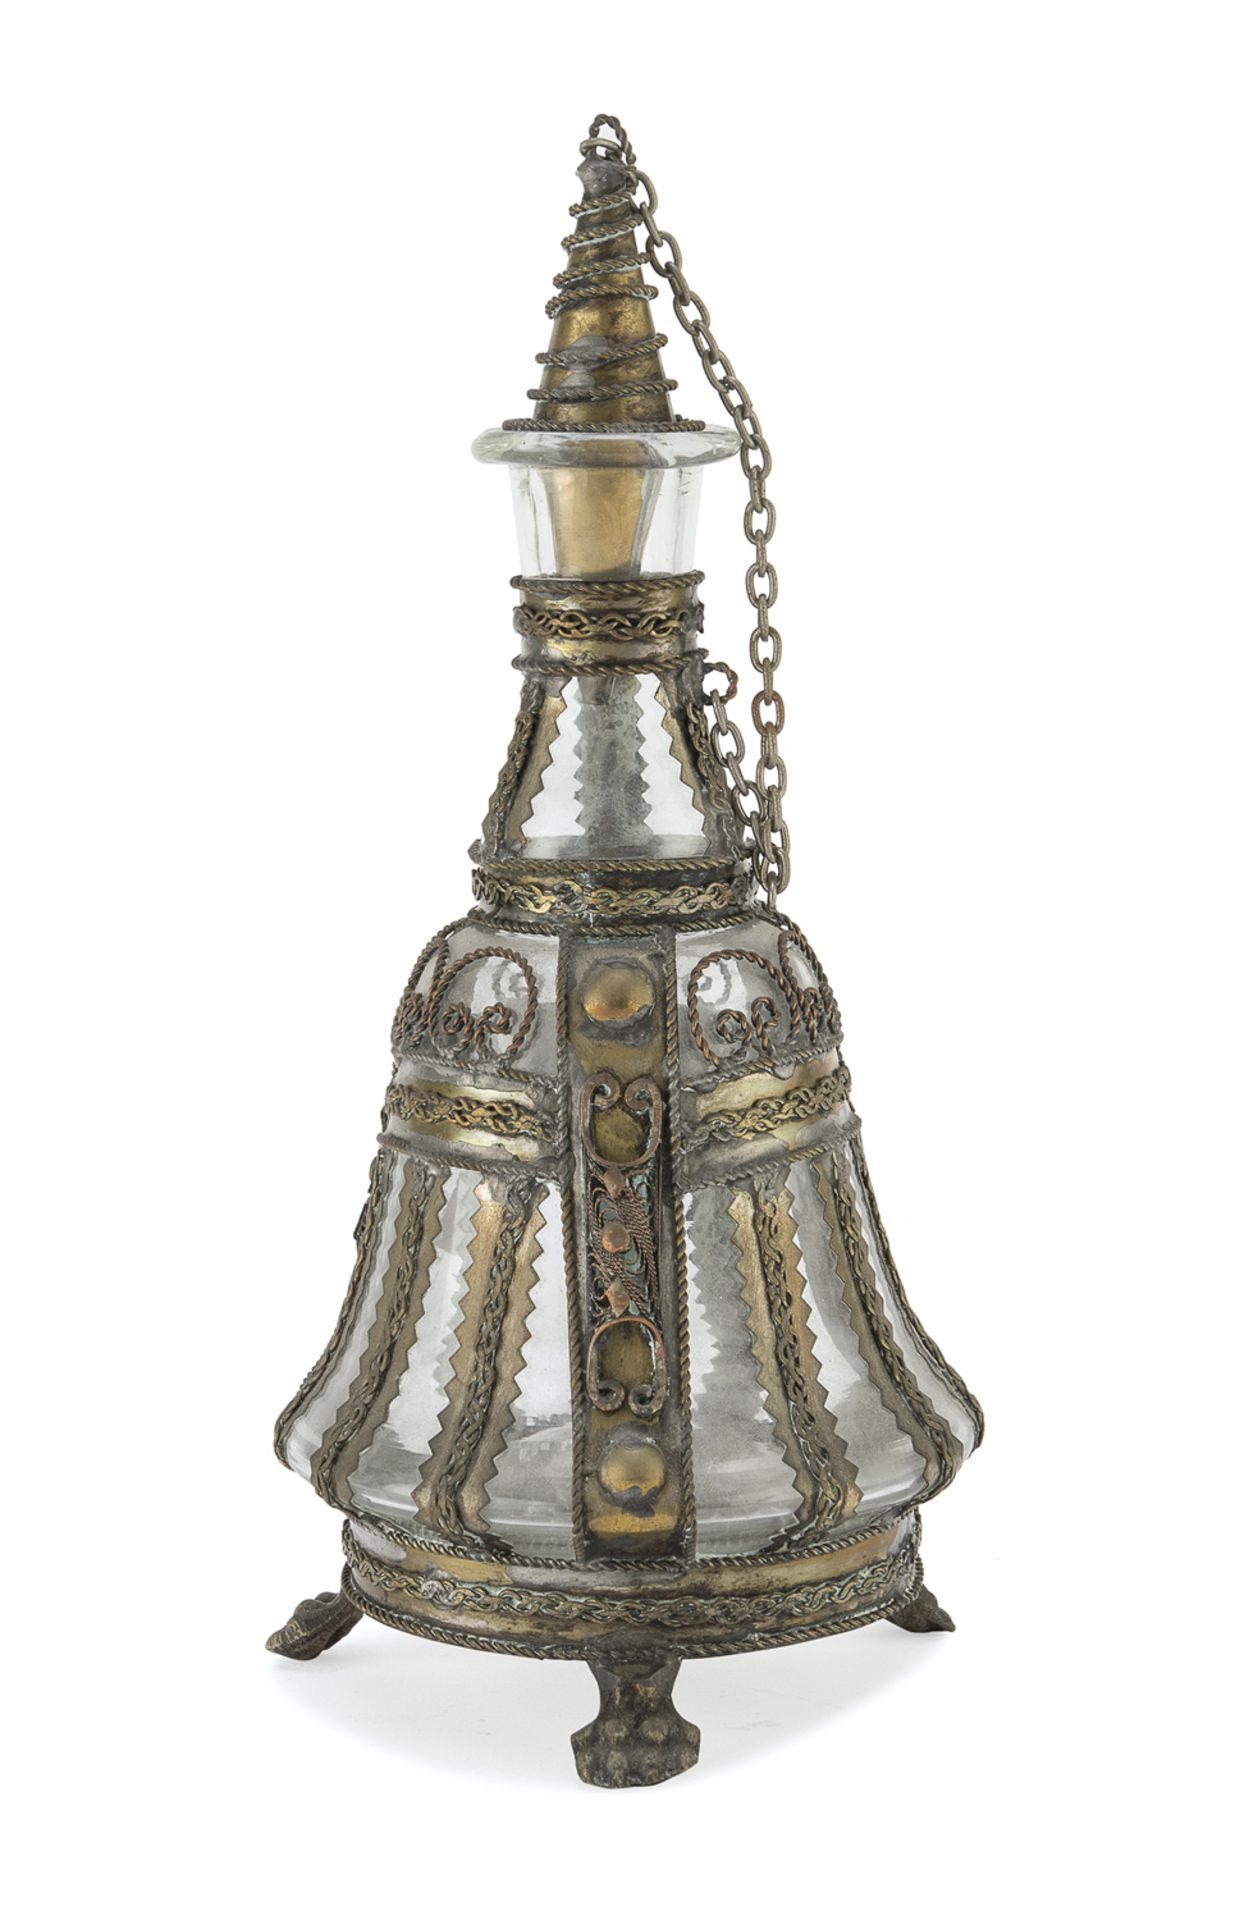 GLASS AND METAL BOTTLE INDIA EARLY 20TH CENTURY